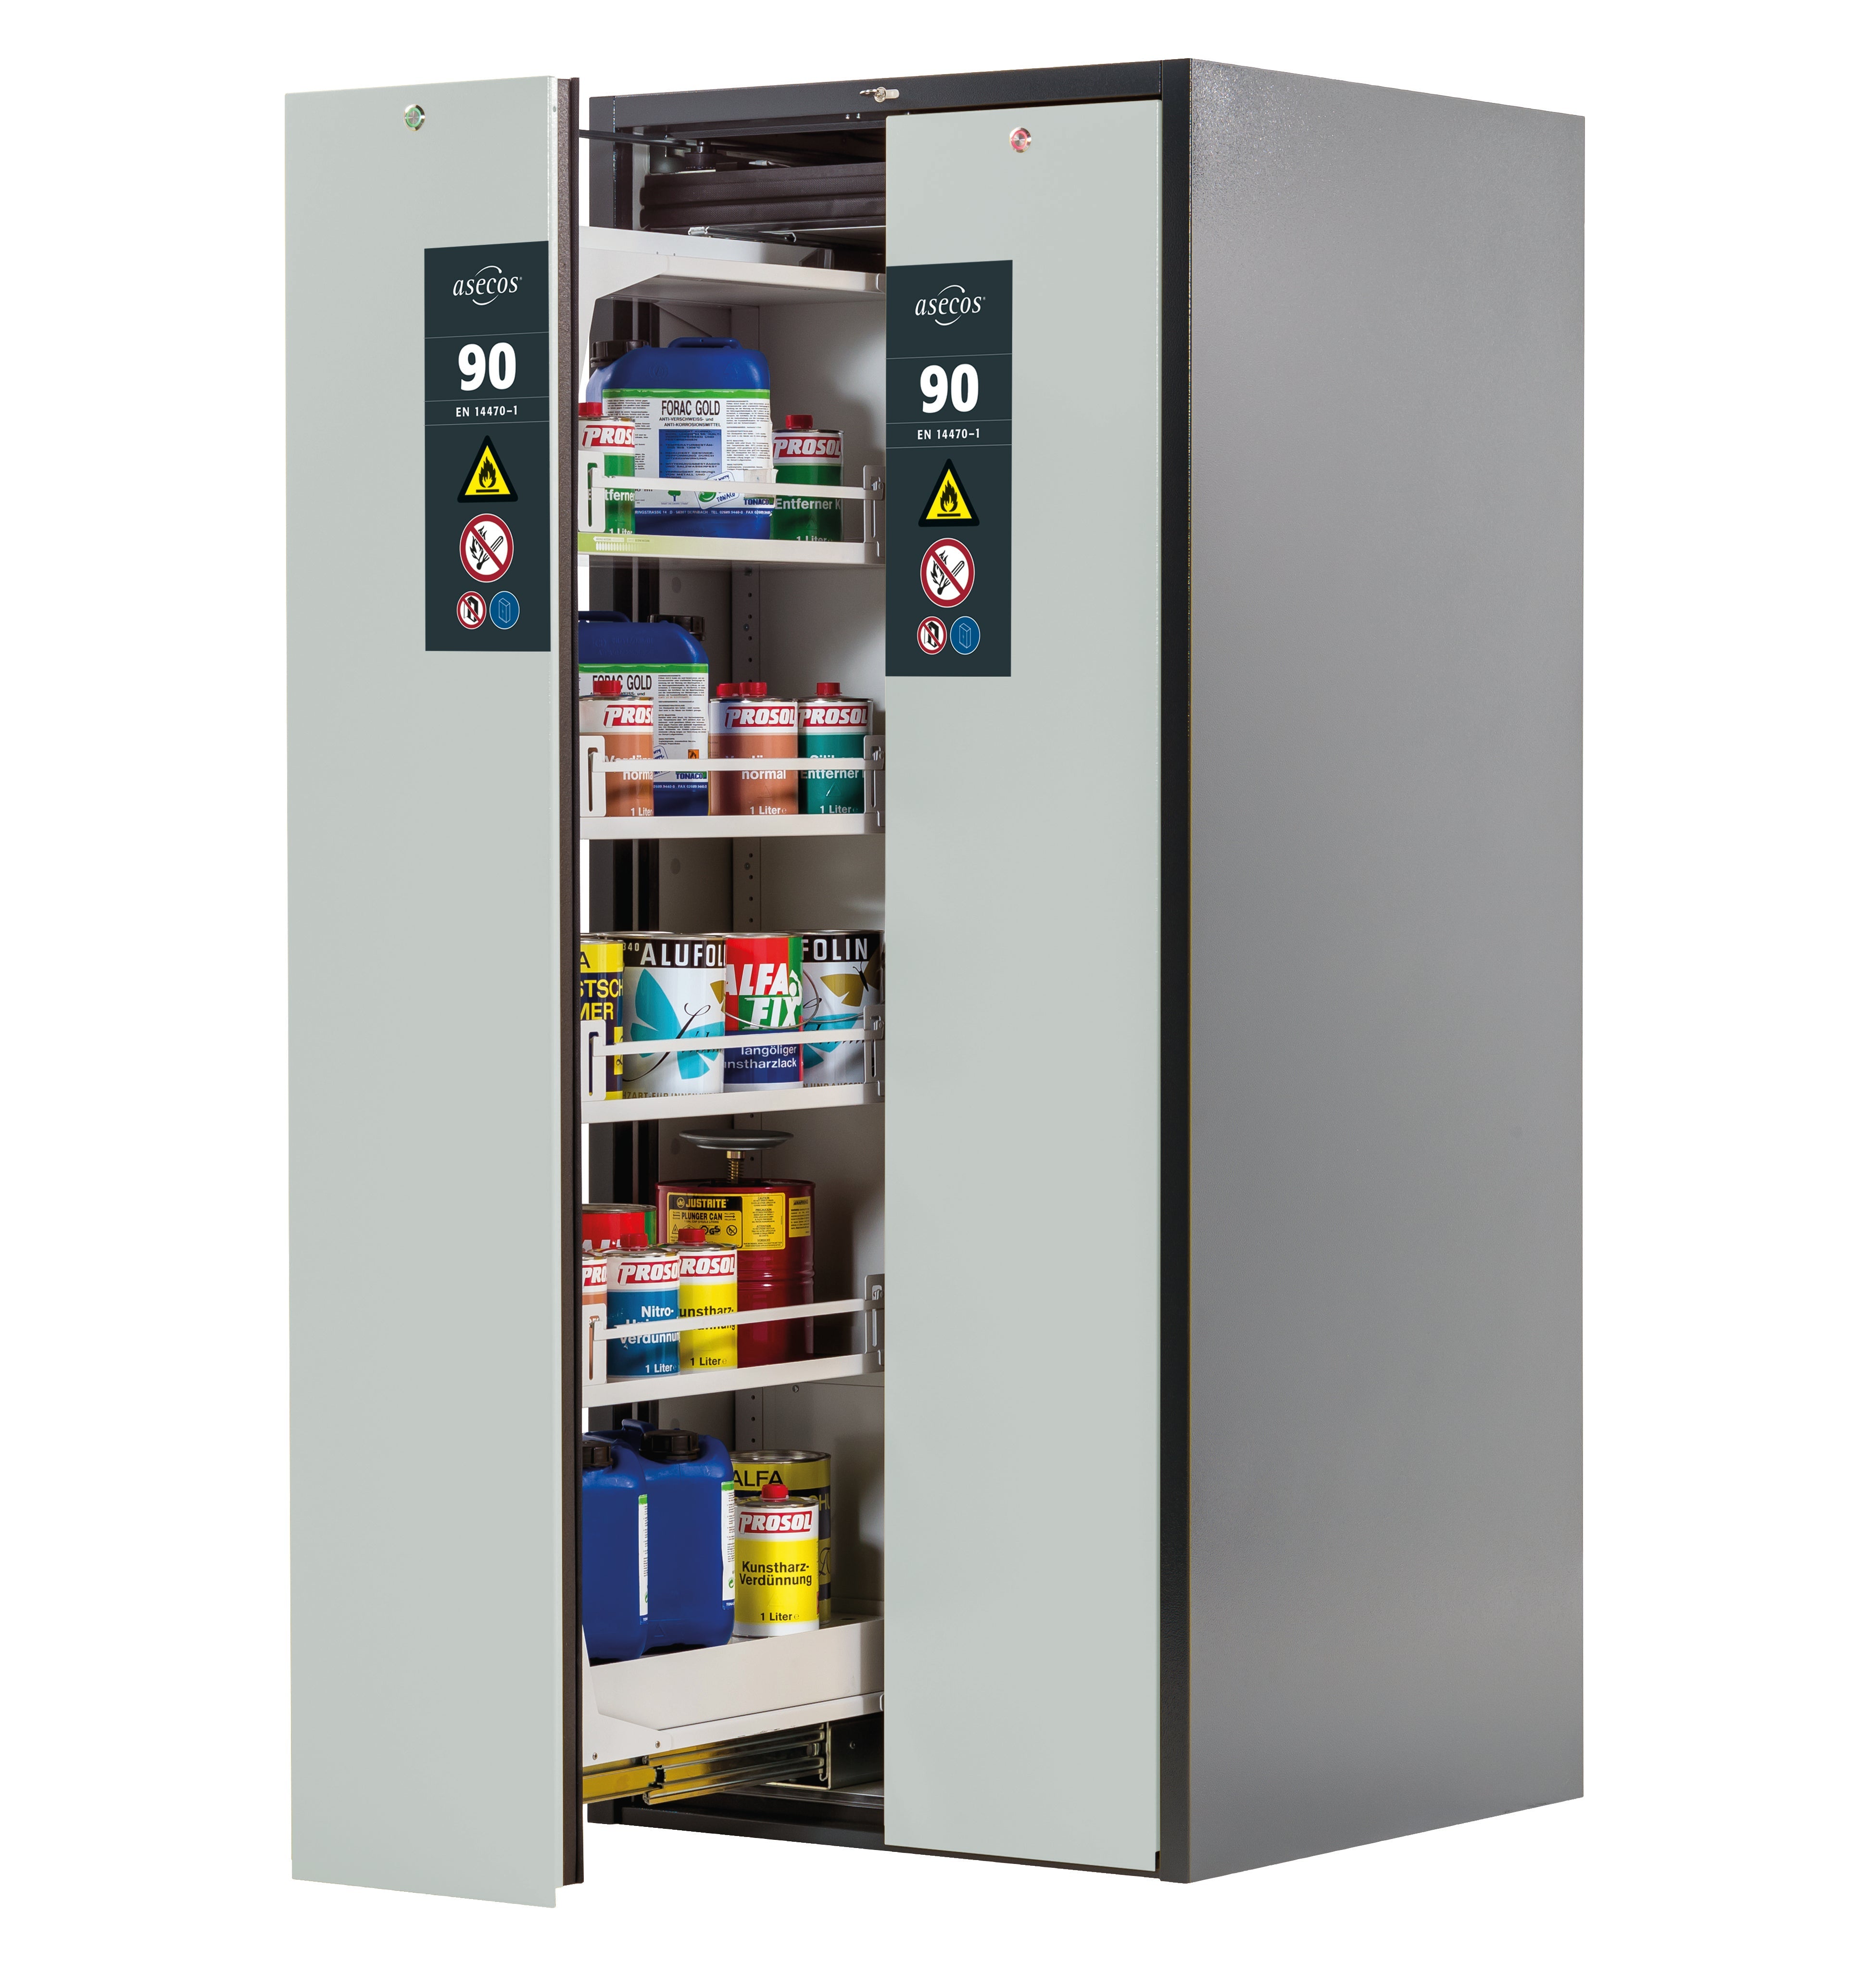 Type 90 safety cabinet V-MOVE-90 model V90.196.081.VDAC:0013 in light gray RAL 7035 with 4x standard shelves (sheet steel)